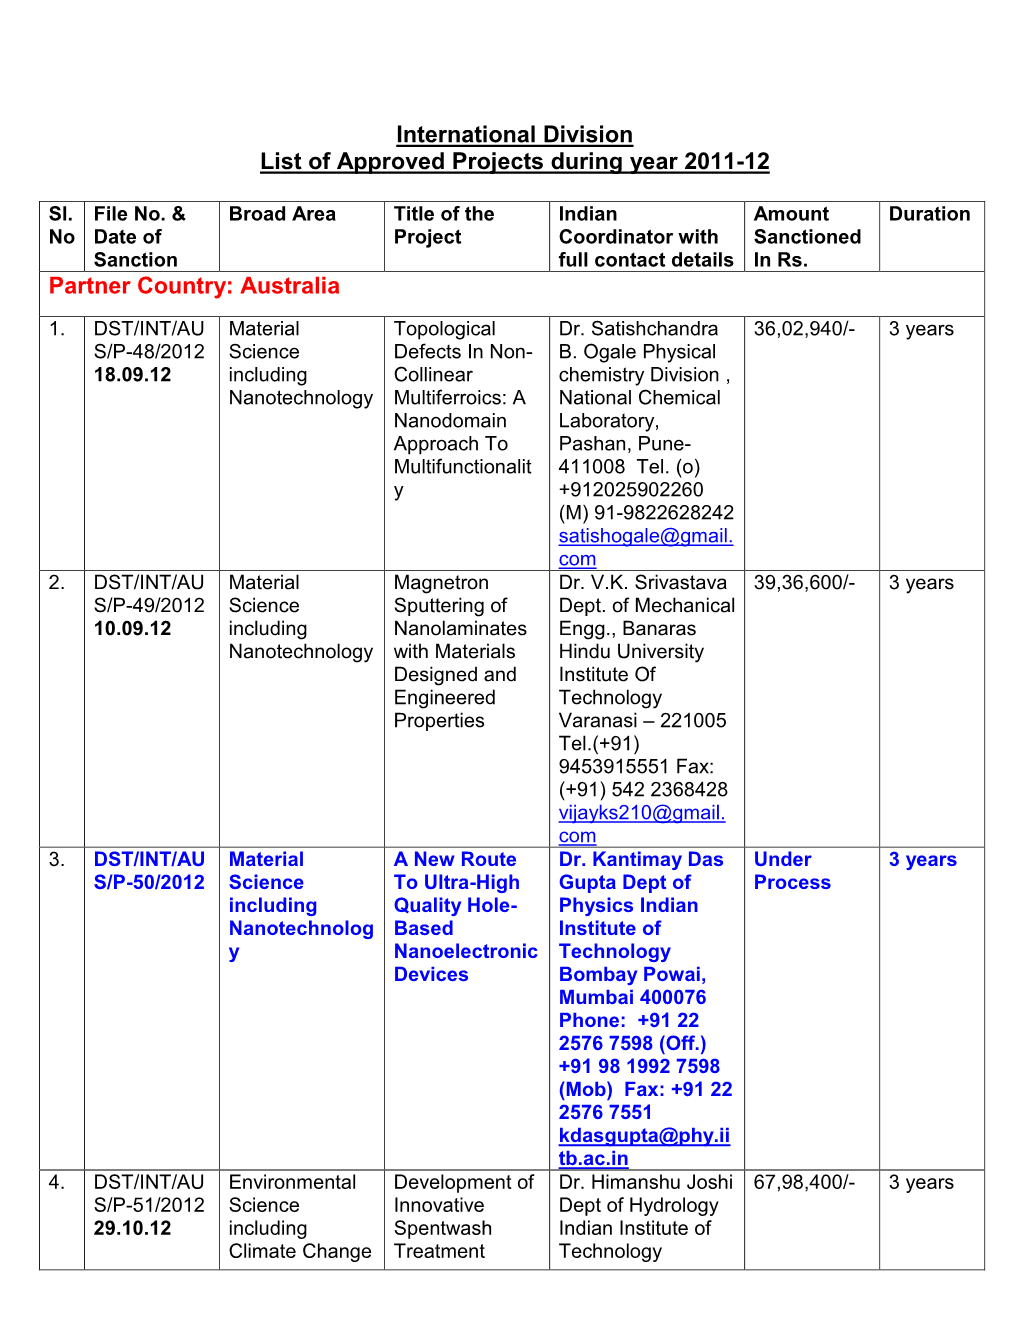 International Division List of Approved Projects During Year 2011-12